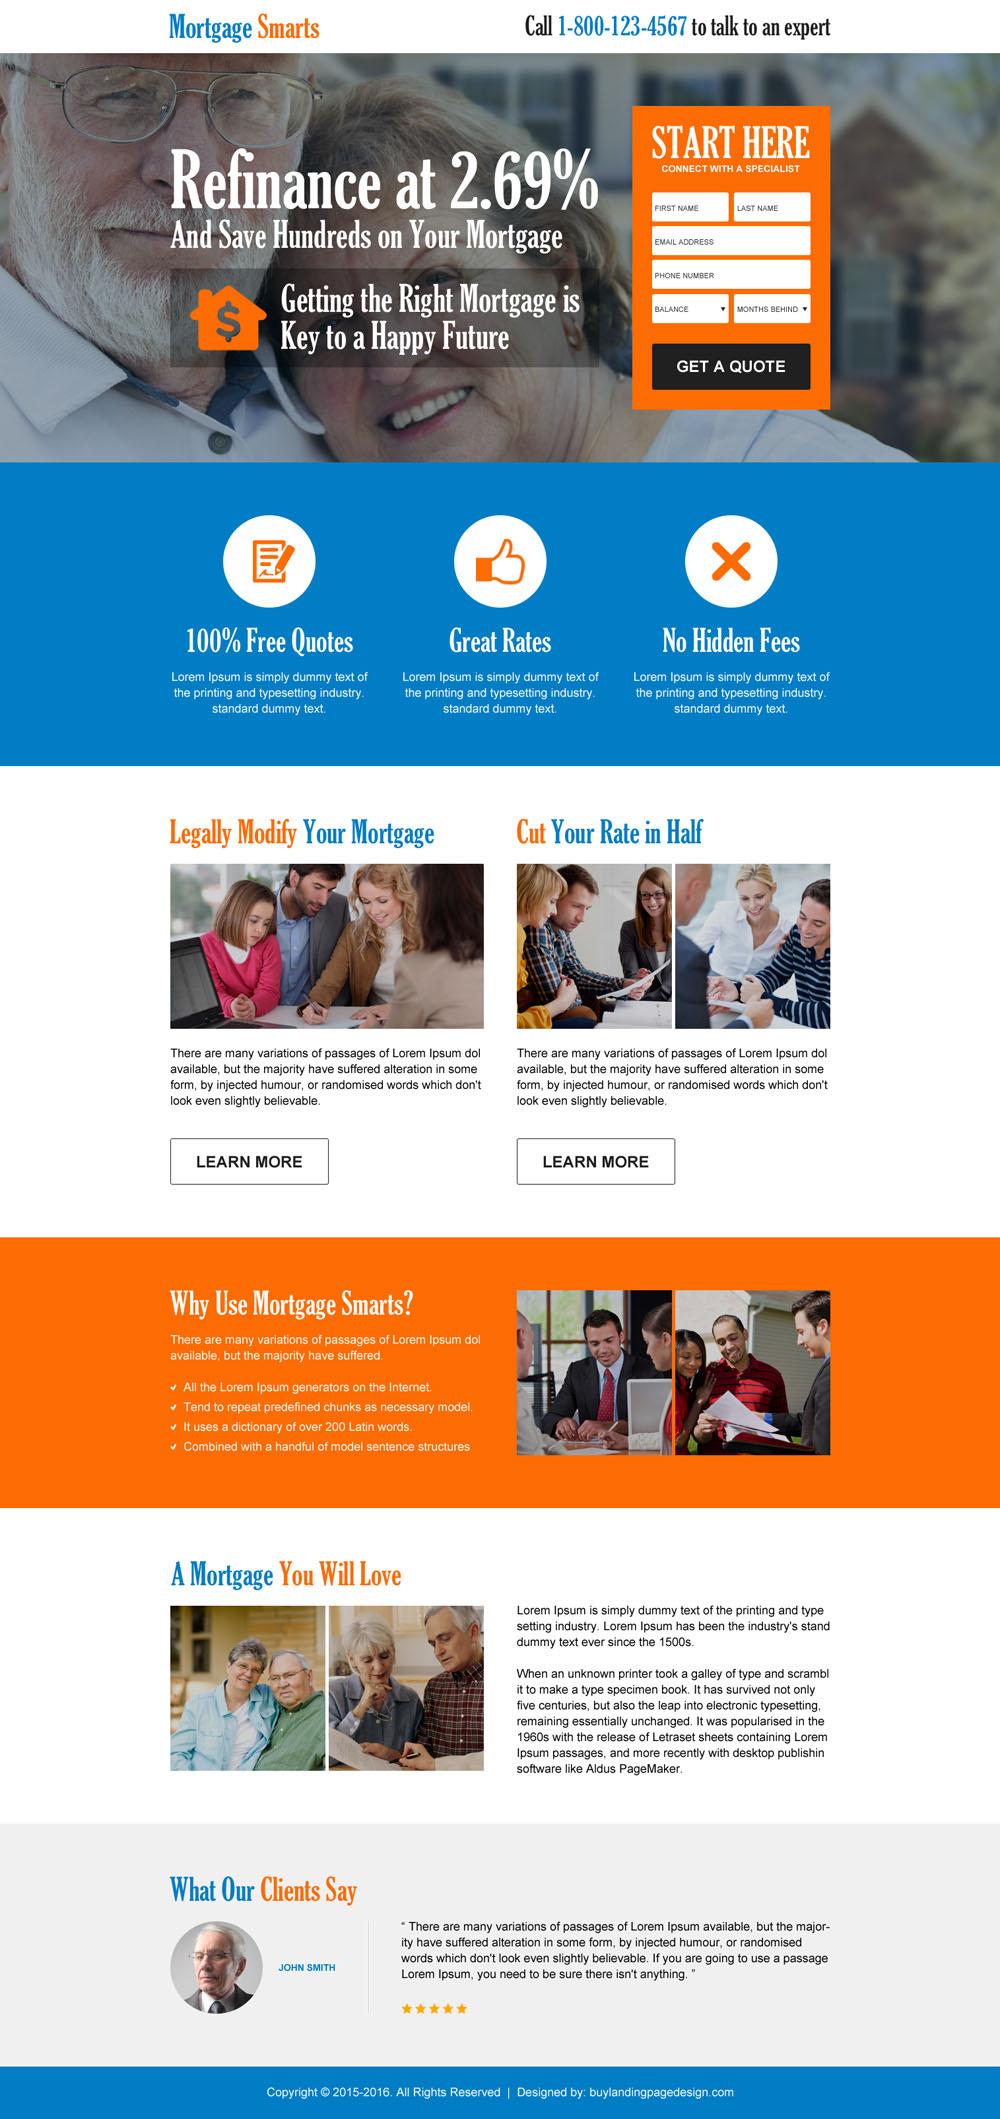 save-money-on-mortgage-consultant-business-service-lead-gen-effective-landing-page-design-017